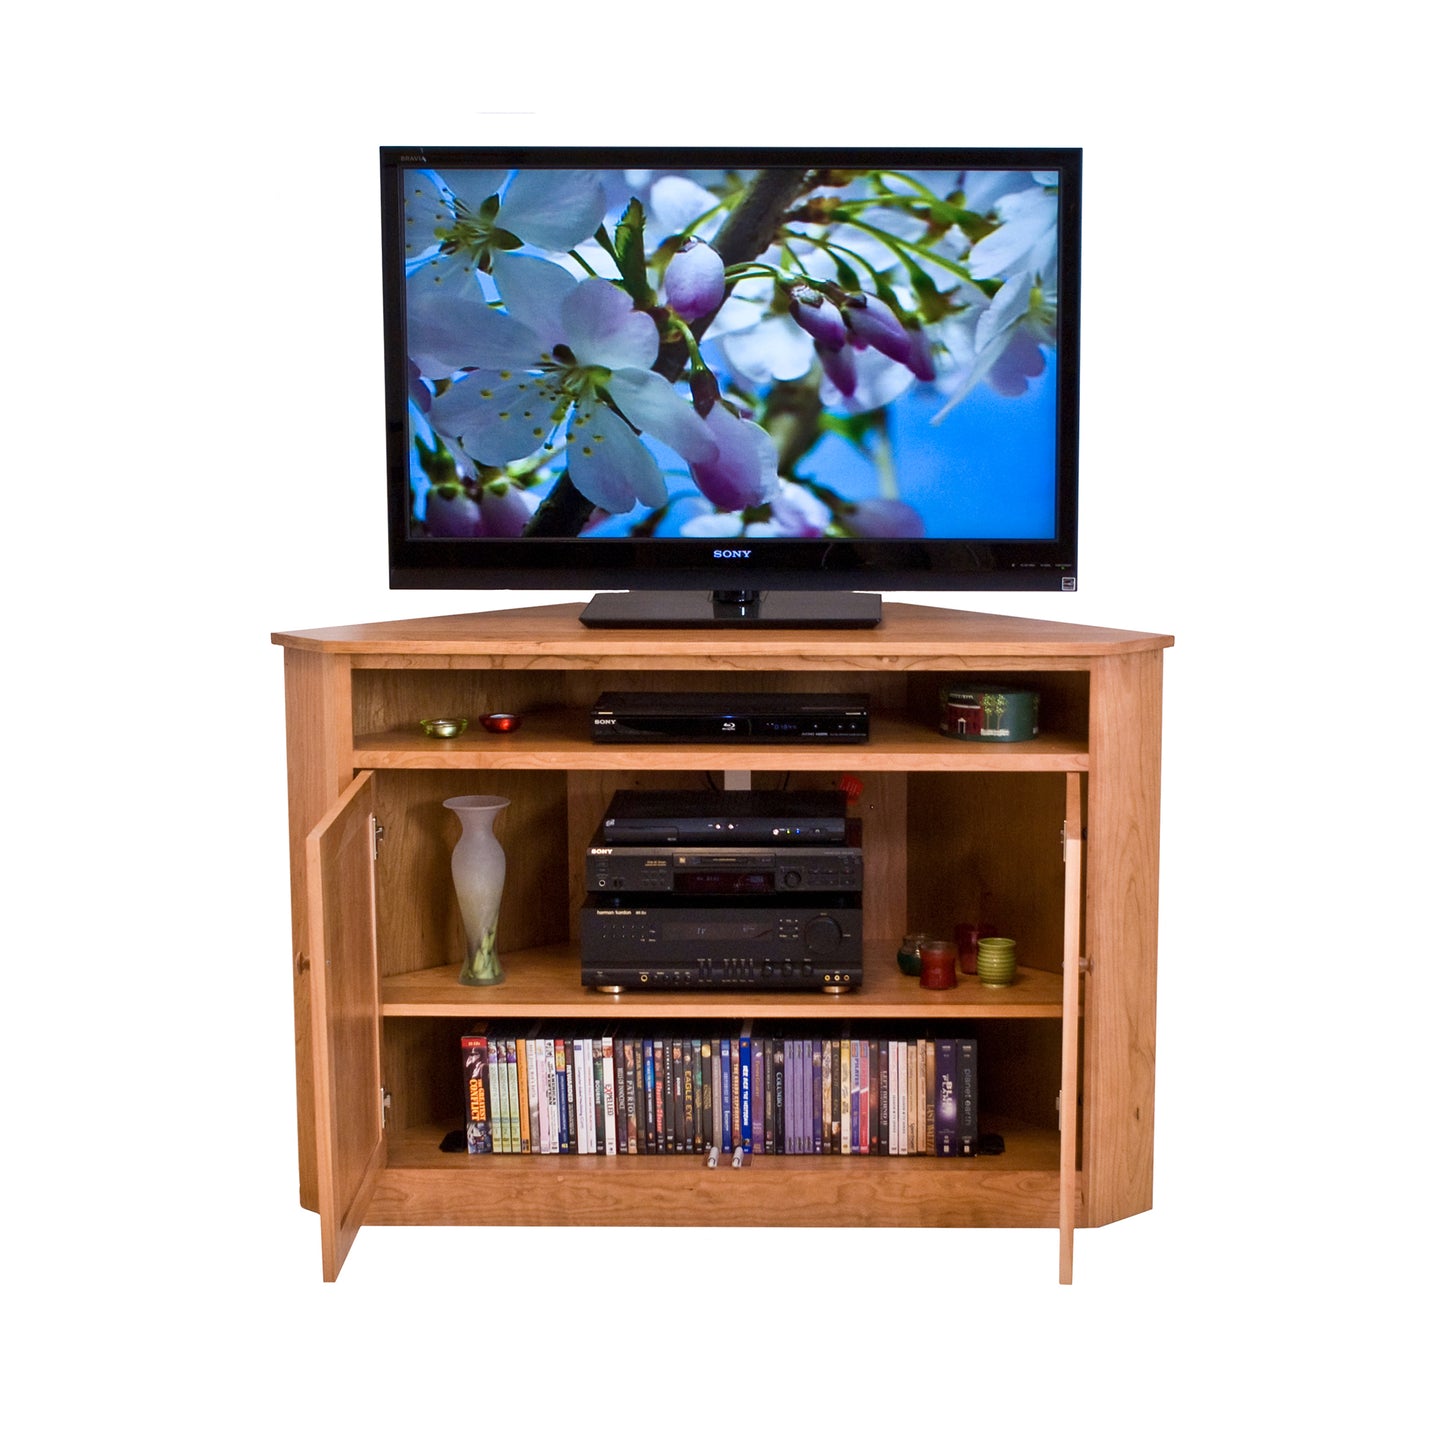 A Flat Screen Corner Entertainment Console with adjustable shelves and a Lyndon Furniture TV stand.